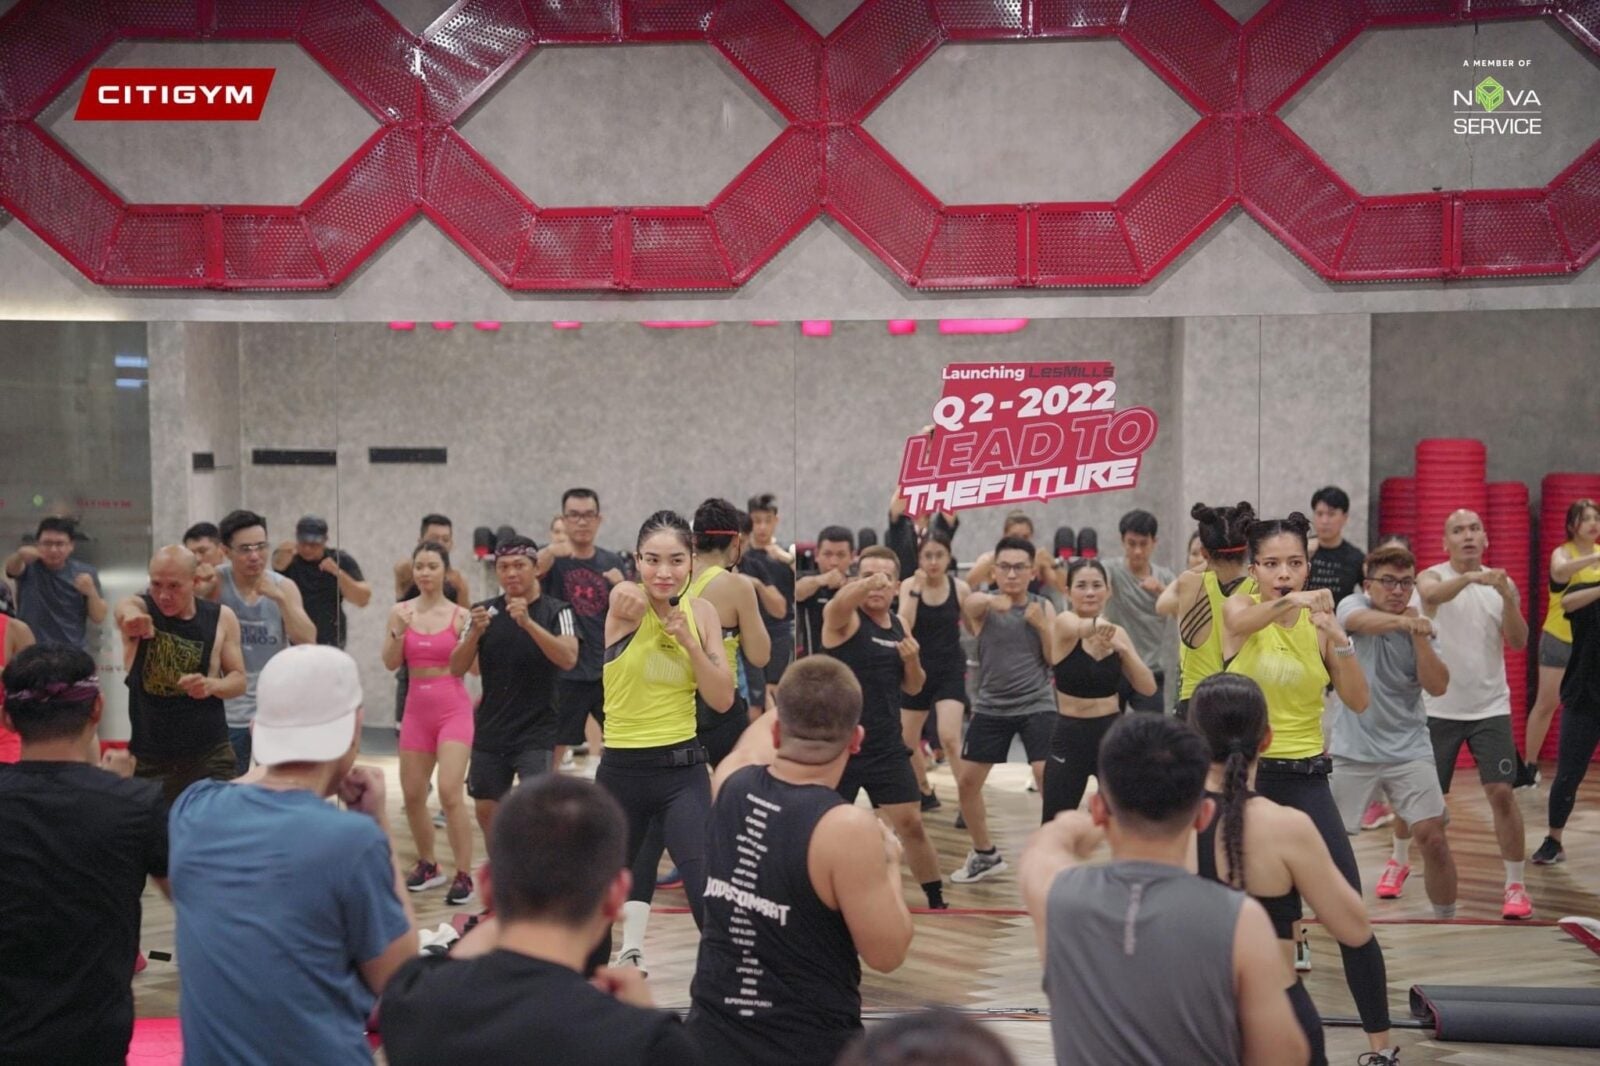 A Group Of People Doing Fitness Exercises With The Help Of An Instructor At Les Mills In 2022 With The Slogan &Quot;Lead To The Future&Quot; Printed On The Wall.